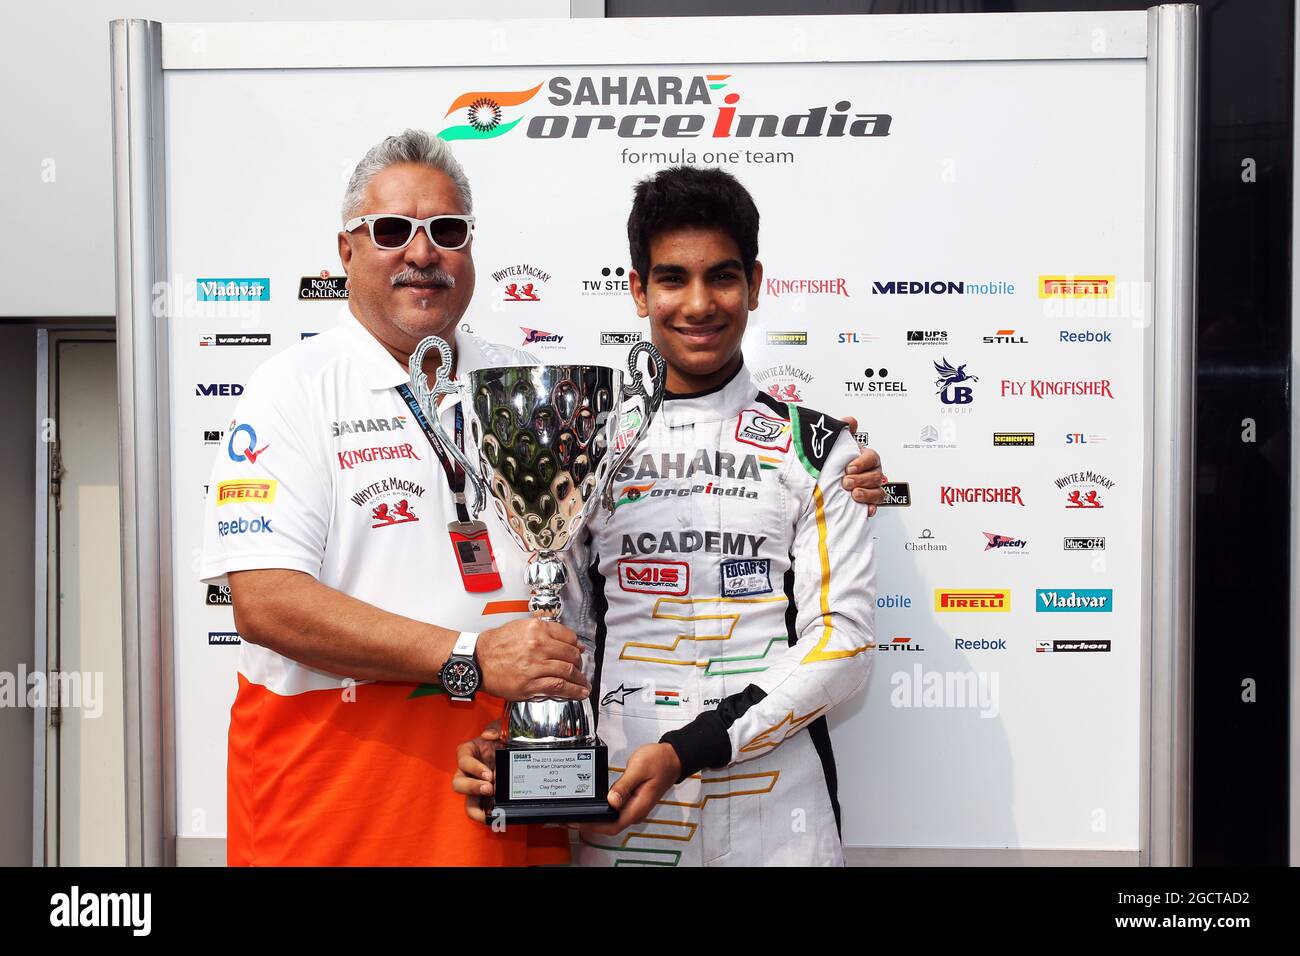 (L to R): Dr. Vijay Mallya (IND) Sahara Force India F1 Team Owner with Jehan Daruvala (IND) Sahara Force India Academy Driver, winner of the British KF3 Karting Championship. Indian Grand Prix, Saturday 26th October 2013. Greater Noida, New Delhi, India. Stock Photo